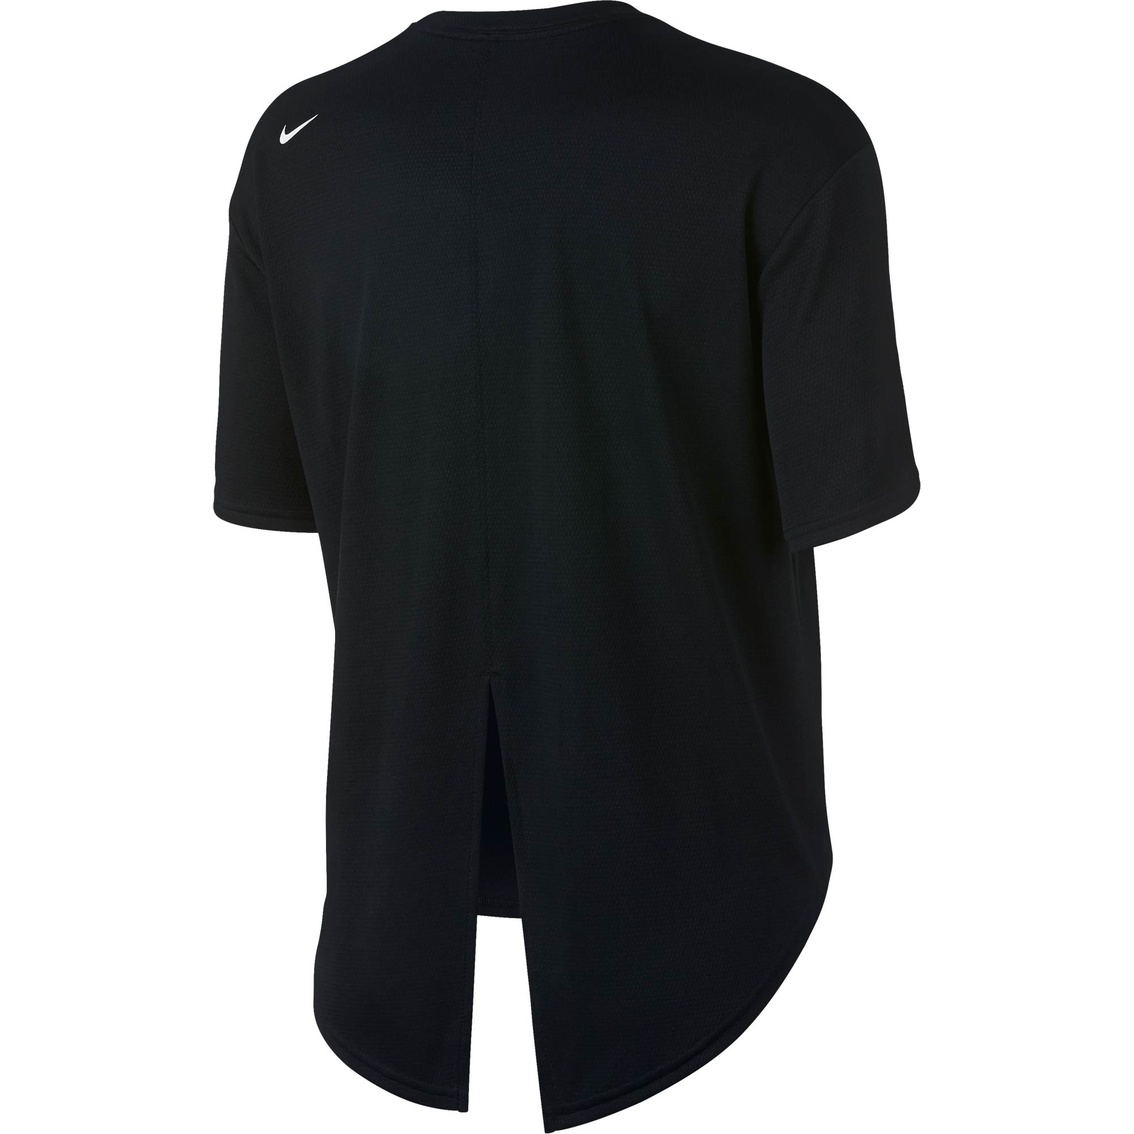 Nike Dry Top - Image 2 of 2